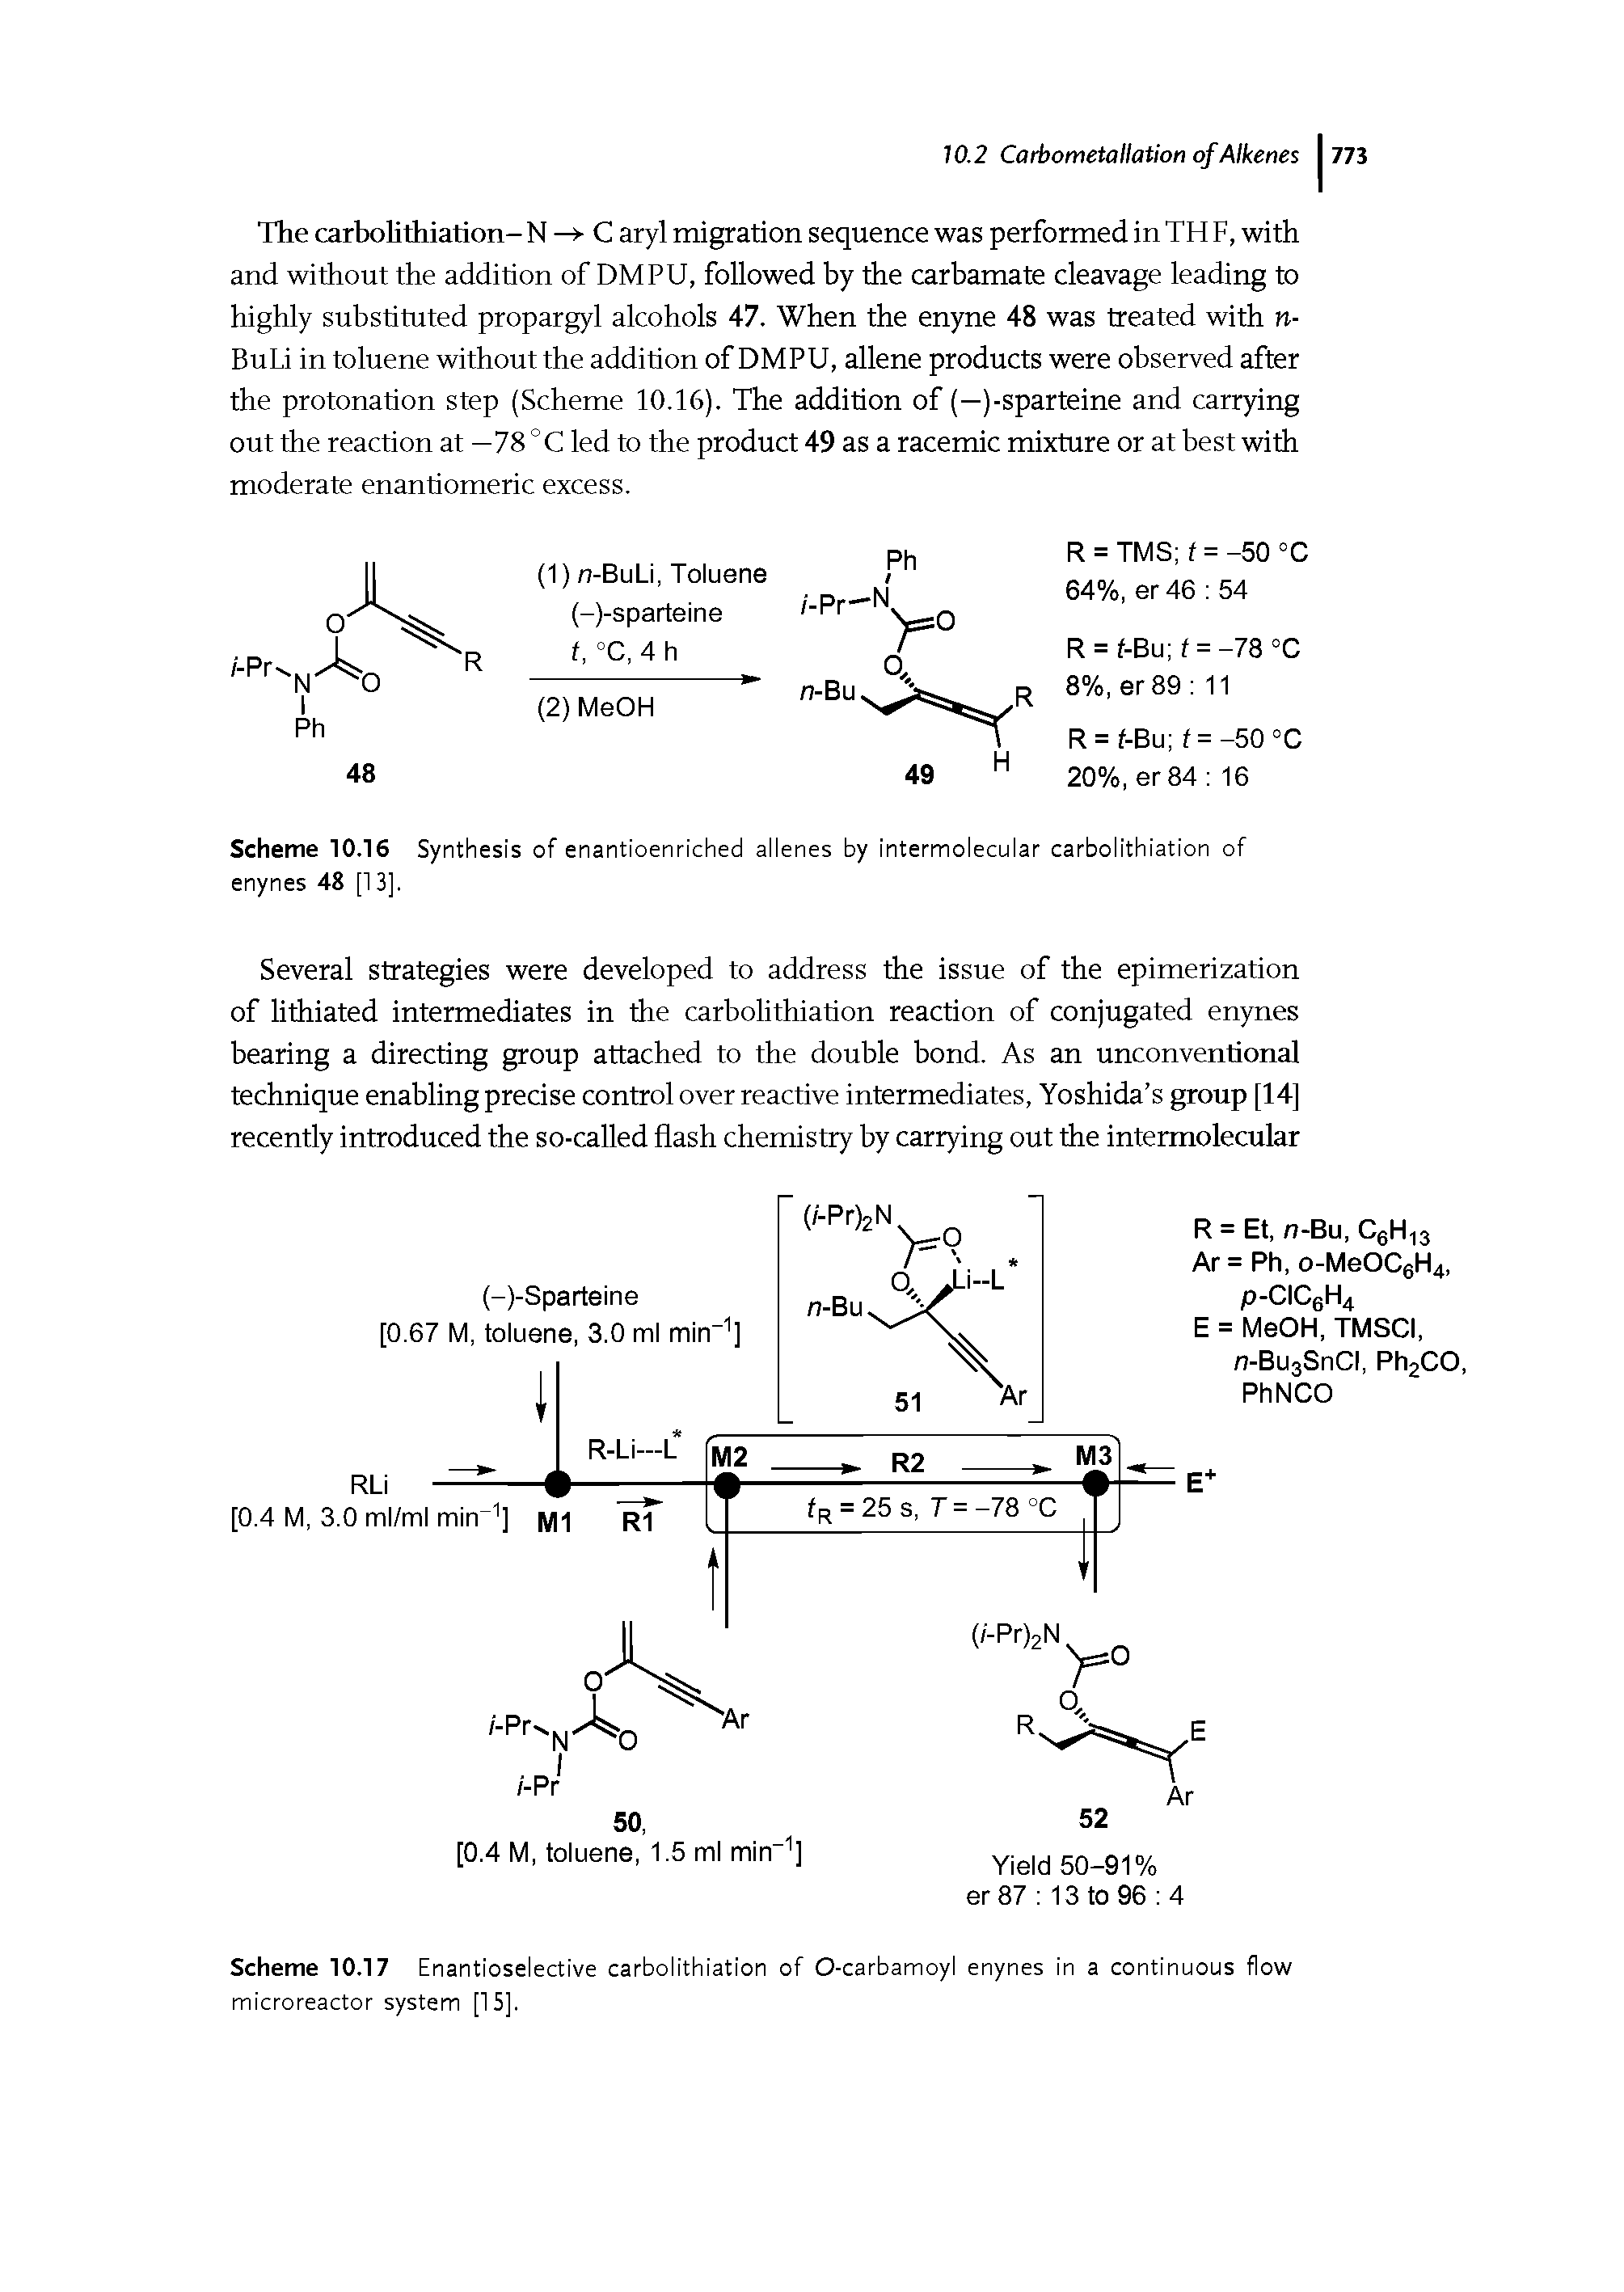 Scheme 10.17 Enantioselective carbolithiation of O-carbamoyl enynes in a continuous flow microreactor system [15].